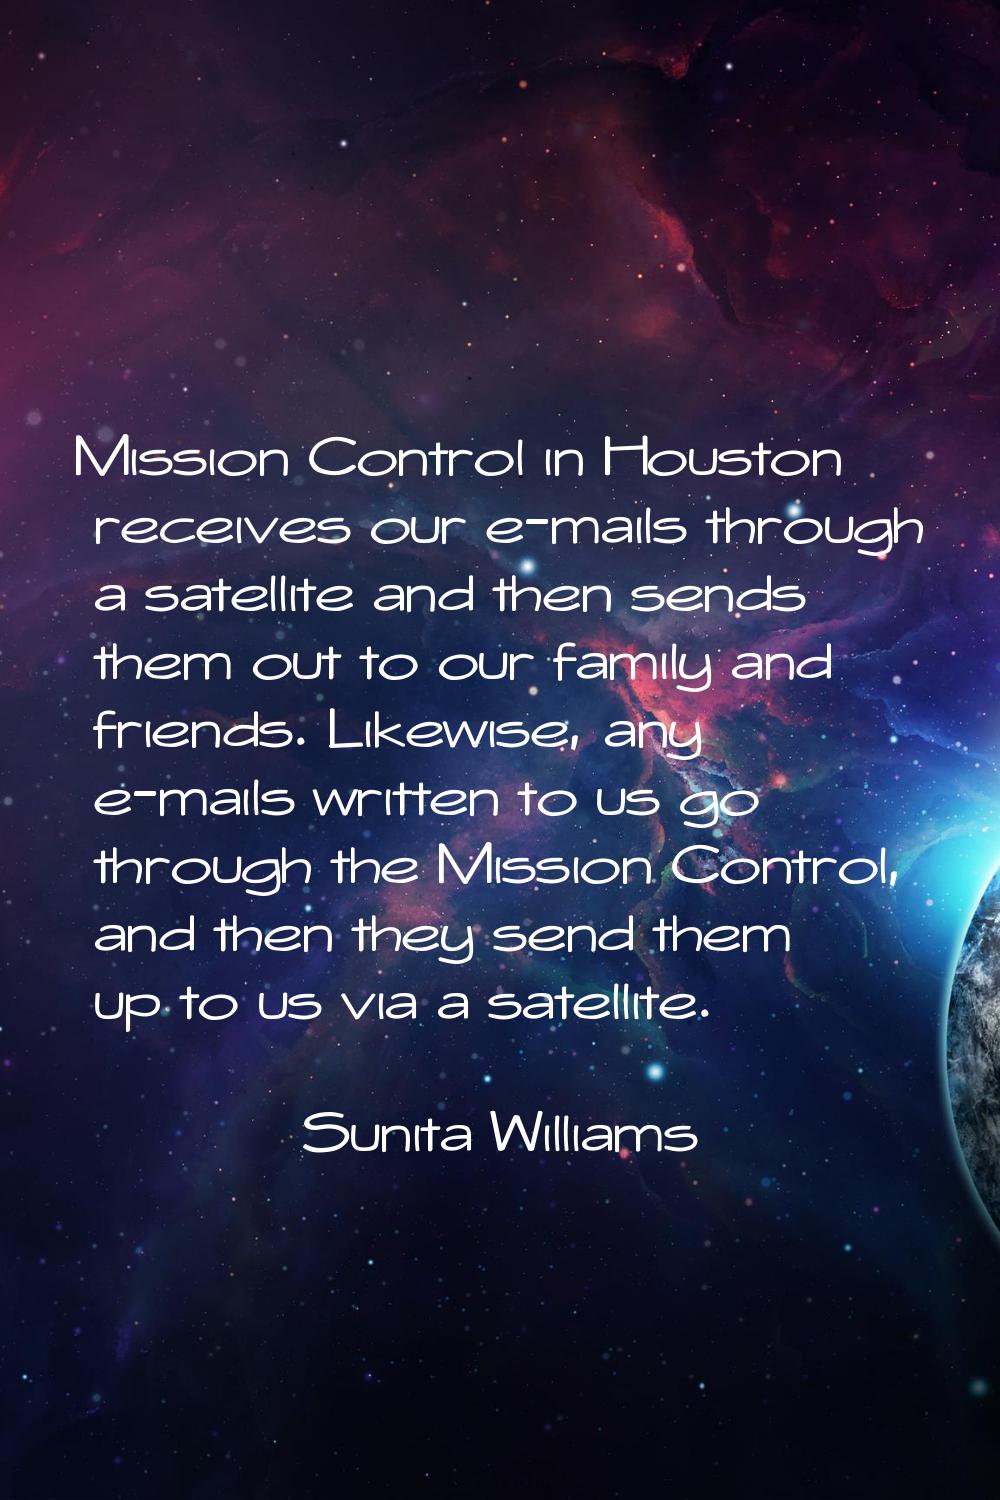 Mission Control in Houston receives our e-mails through a satellite and then sends them out to our 